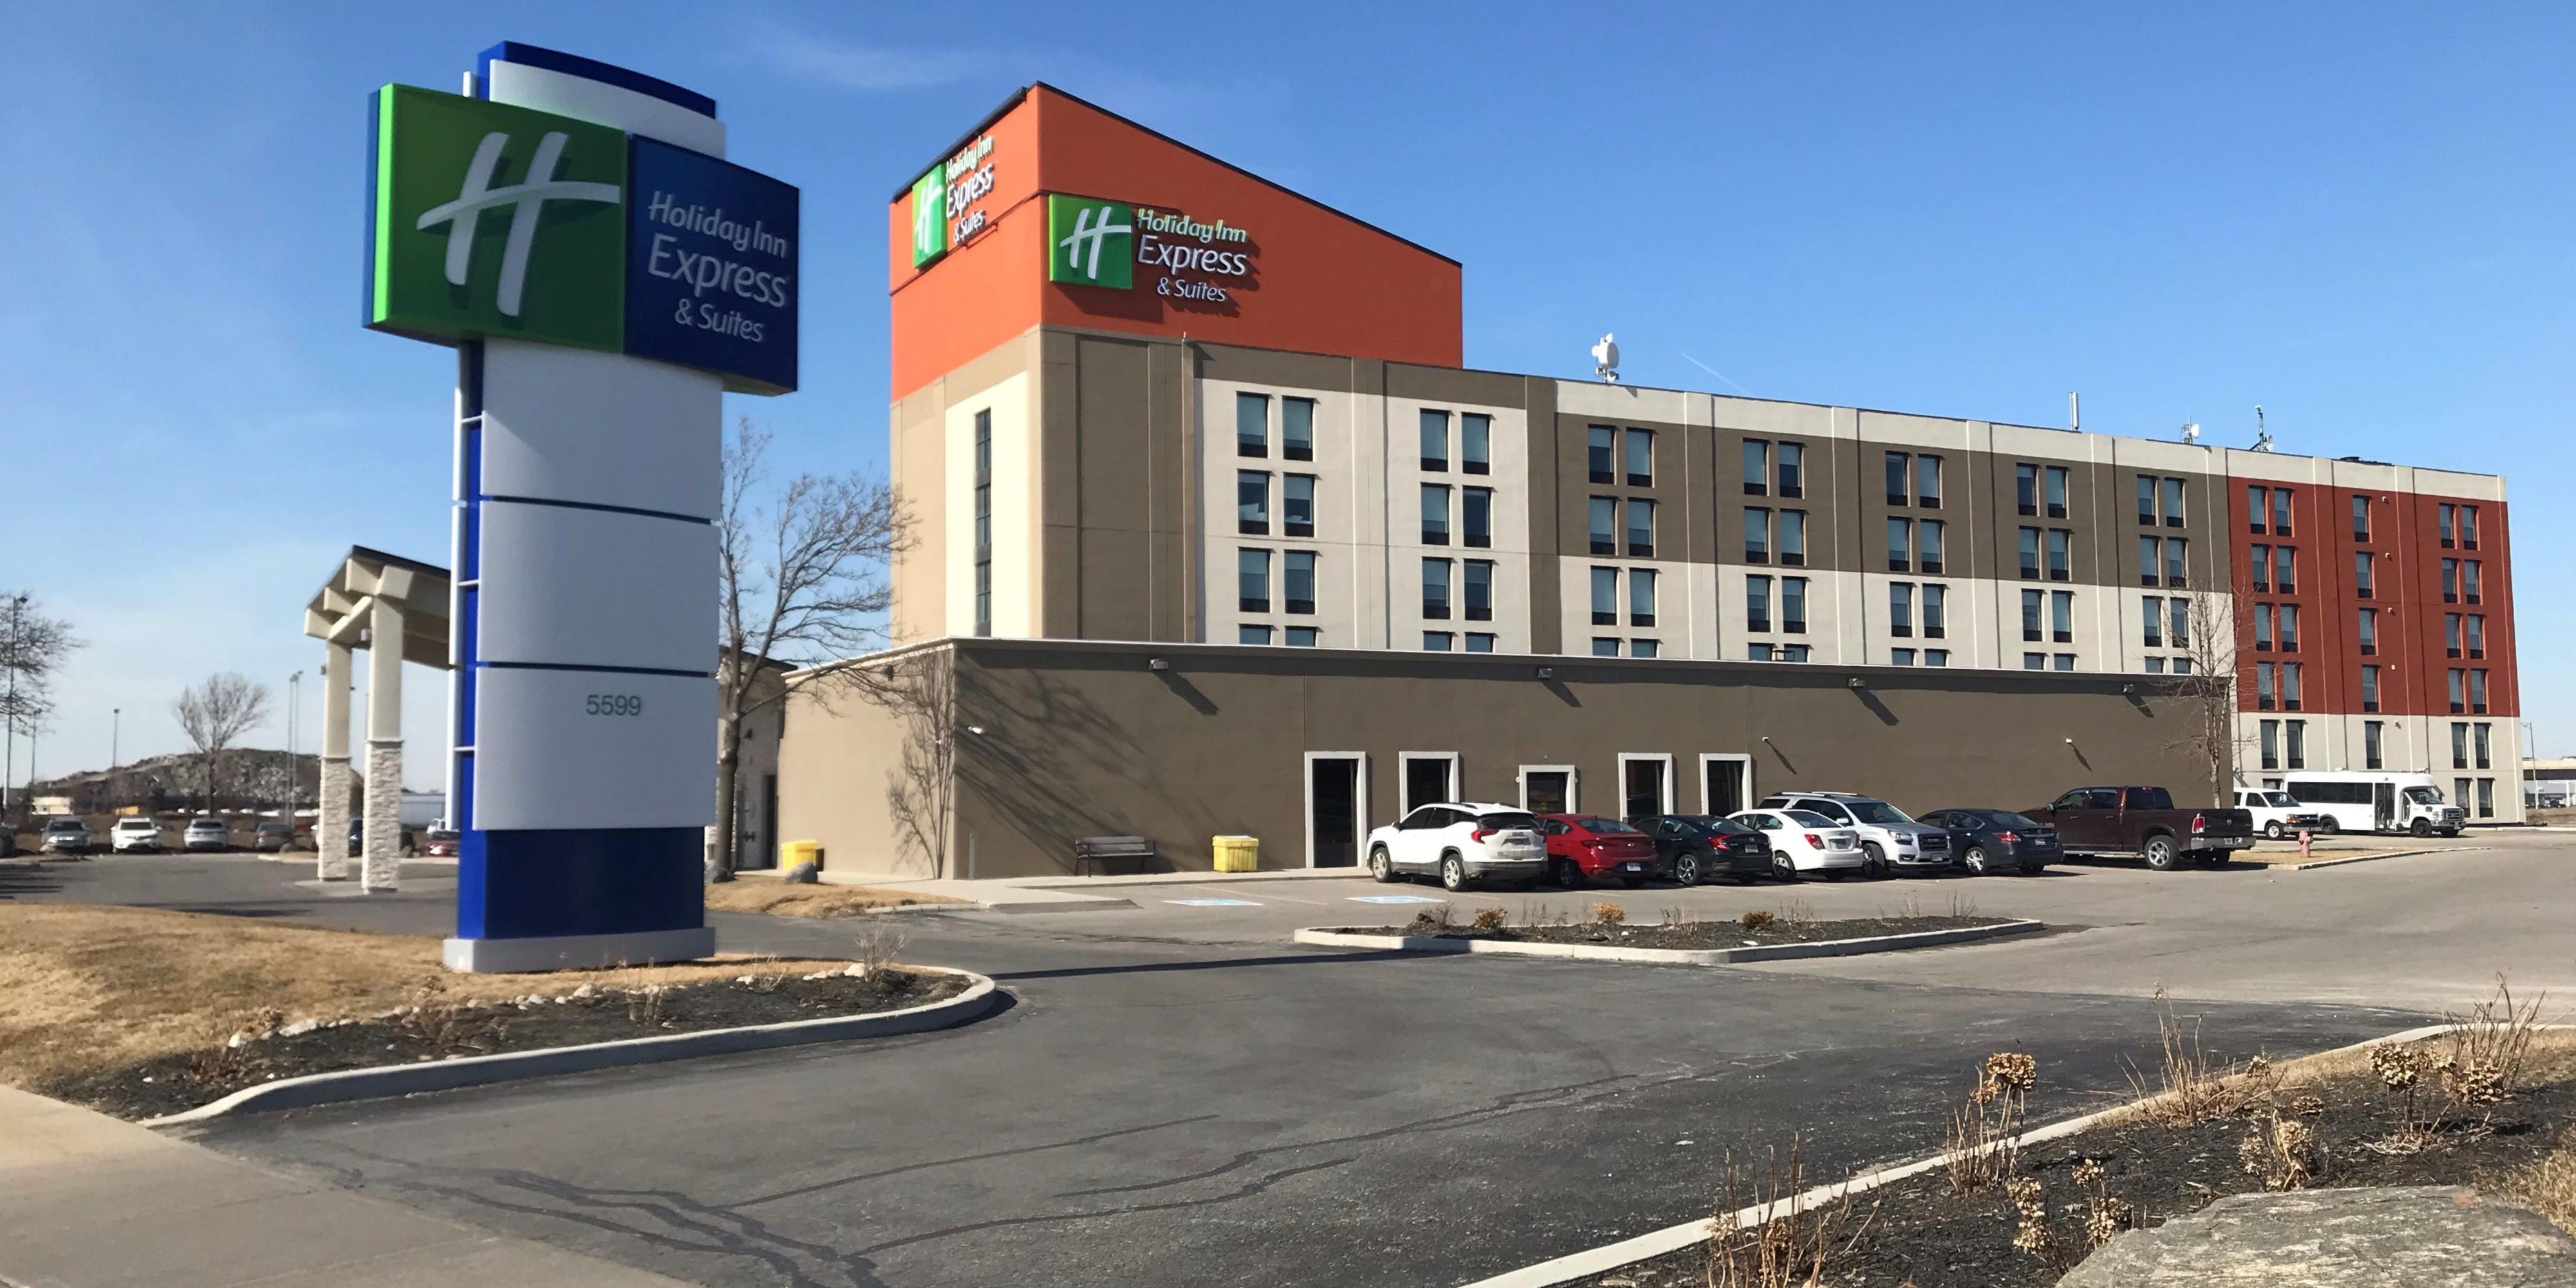 We offer 24-hour complimentary shuttle service to Toronto Pearson International Airport. Look for the blue Holiday Inn Express Toronto Airport West logo on the van. 